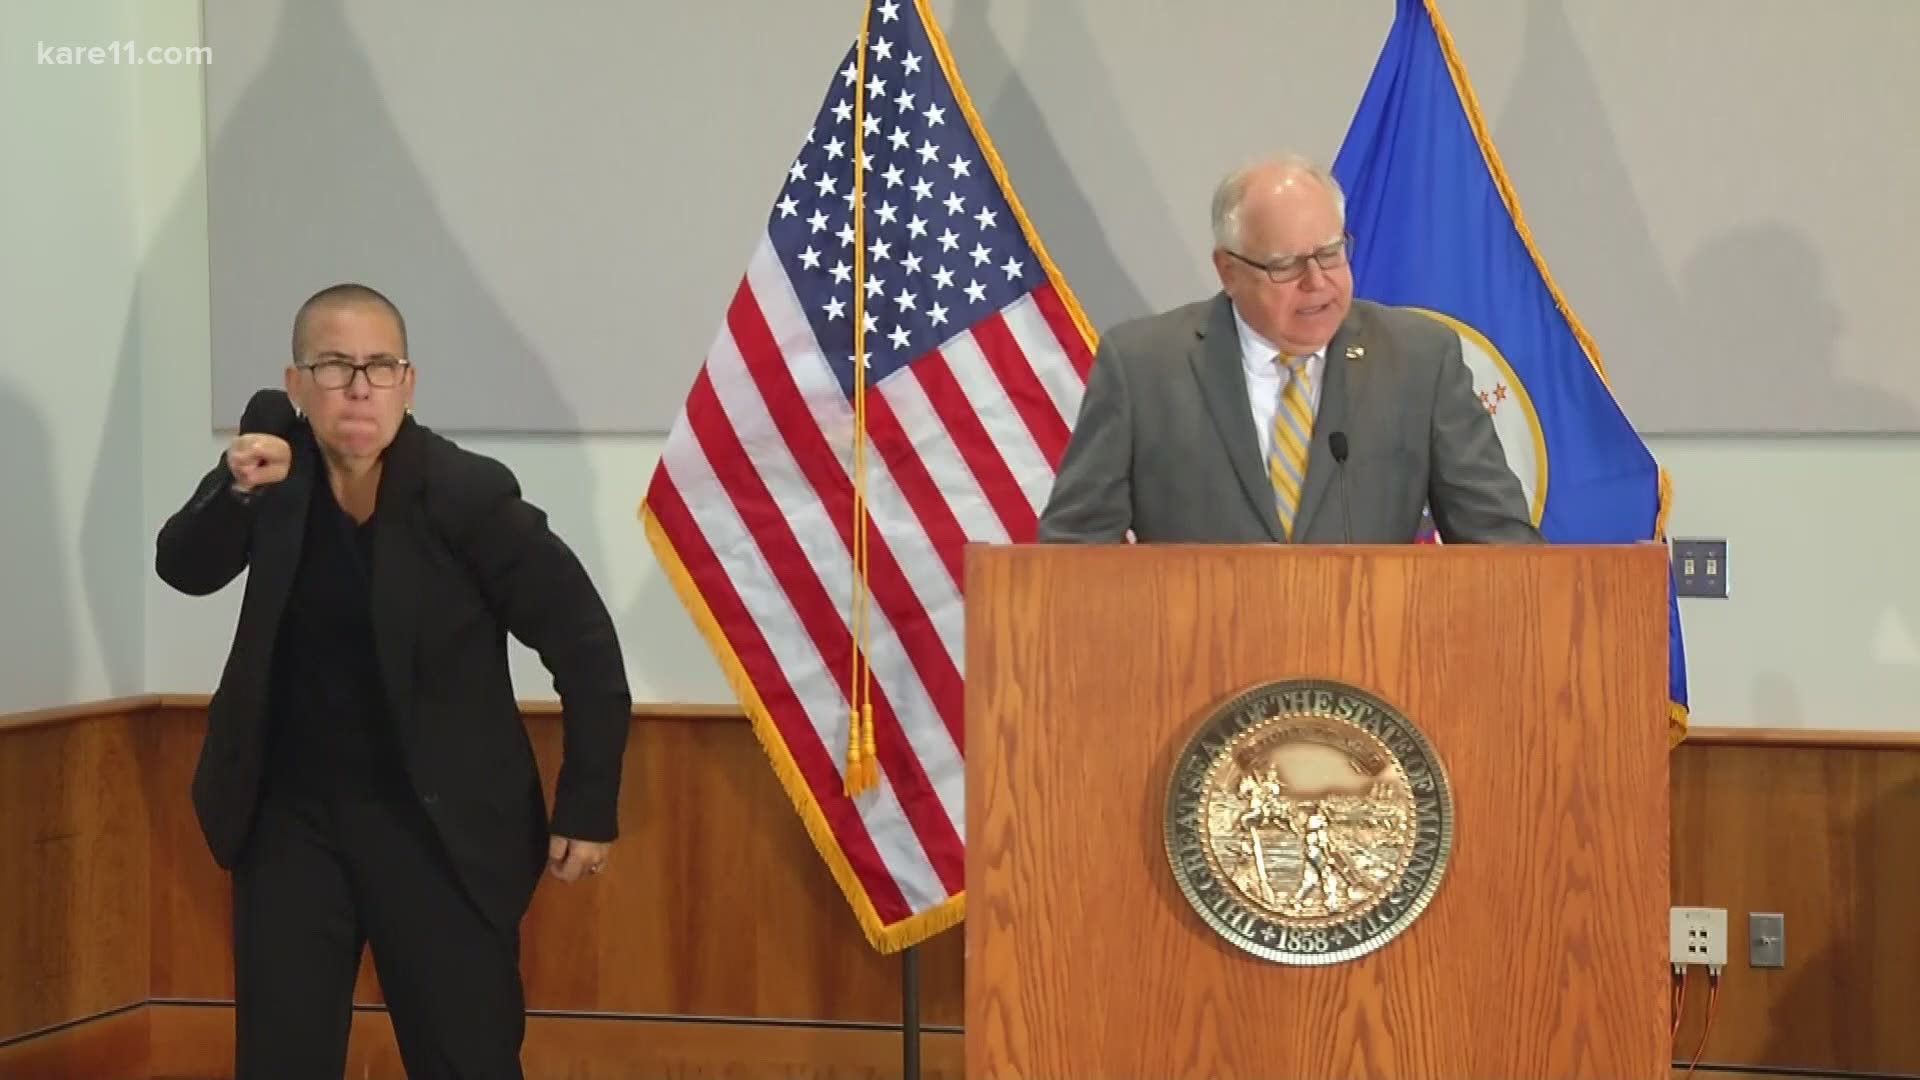 Gov. Tim Walz says he's considering whether or not to issue a statewide mask mandate, and the nation's top leaders now say they support wearing face coverings.